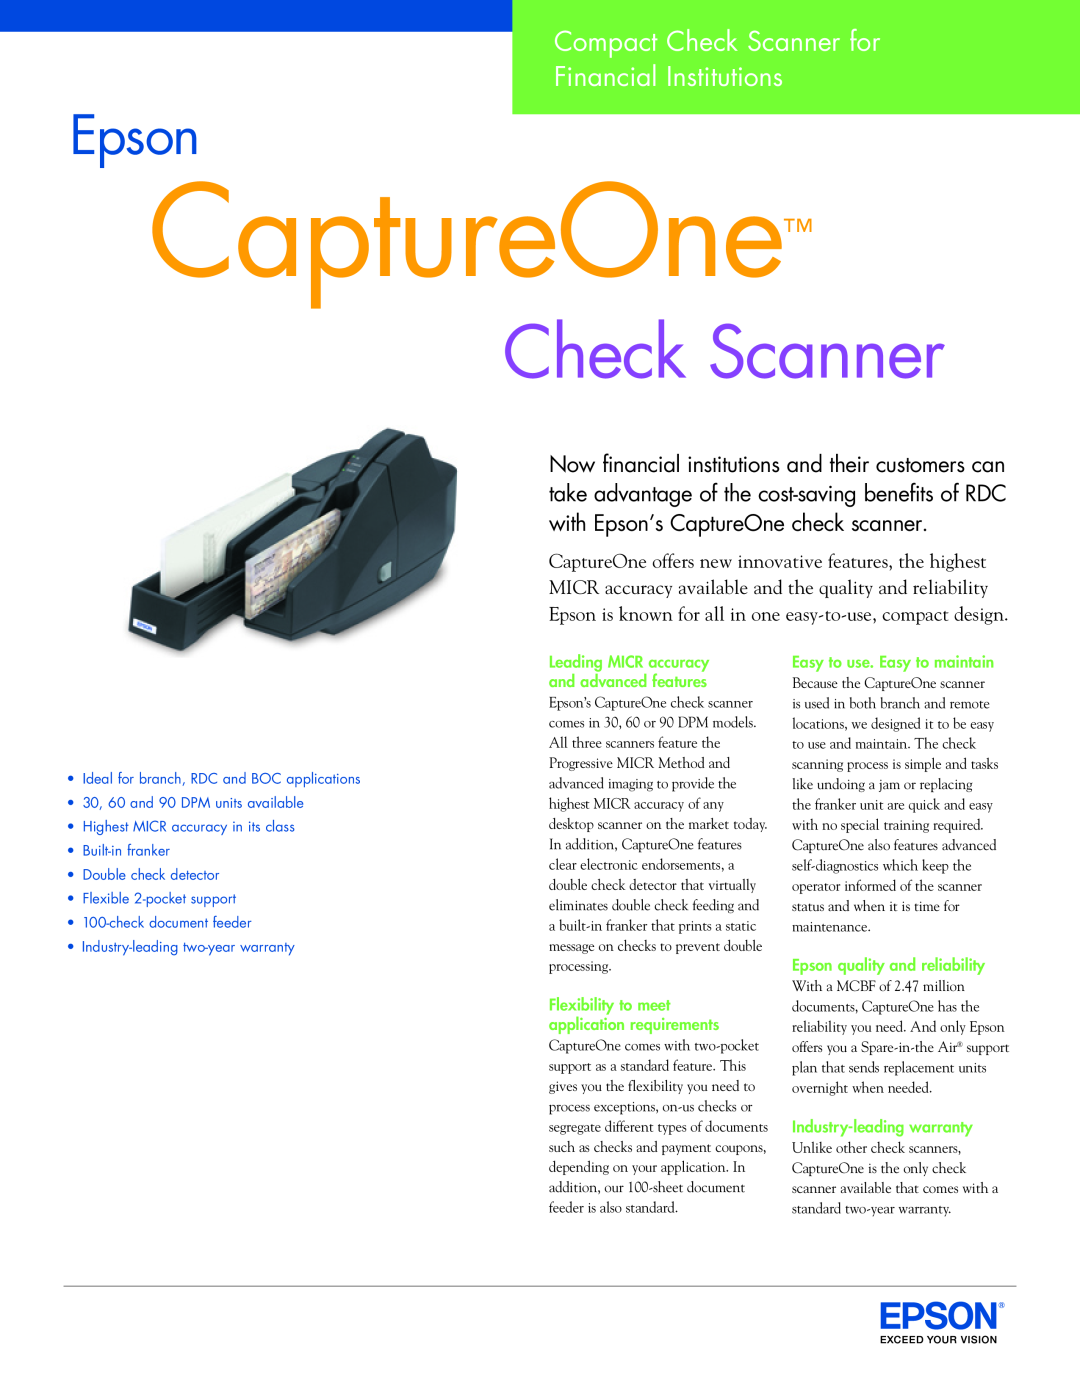 Epson 60DPM warranty CaptureOne, Epson, Compact Check Scanner for Financial Institutions, Industry-leading warranty 